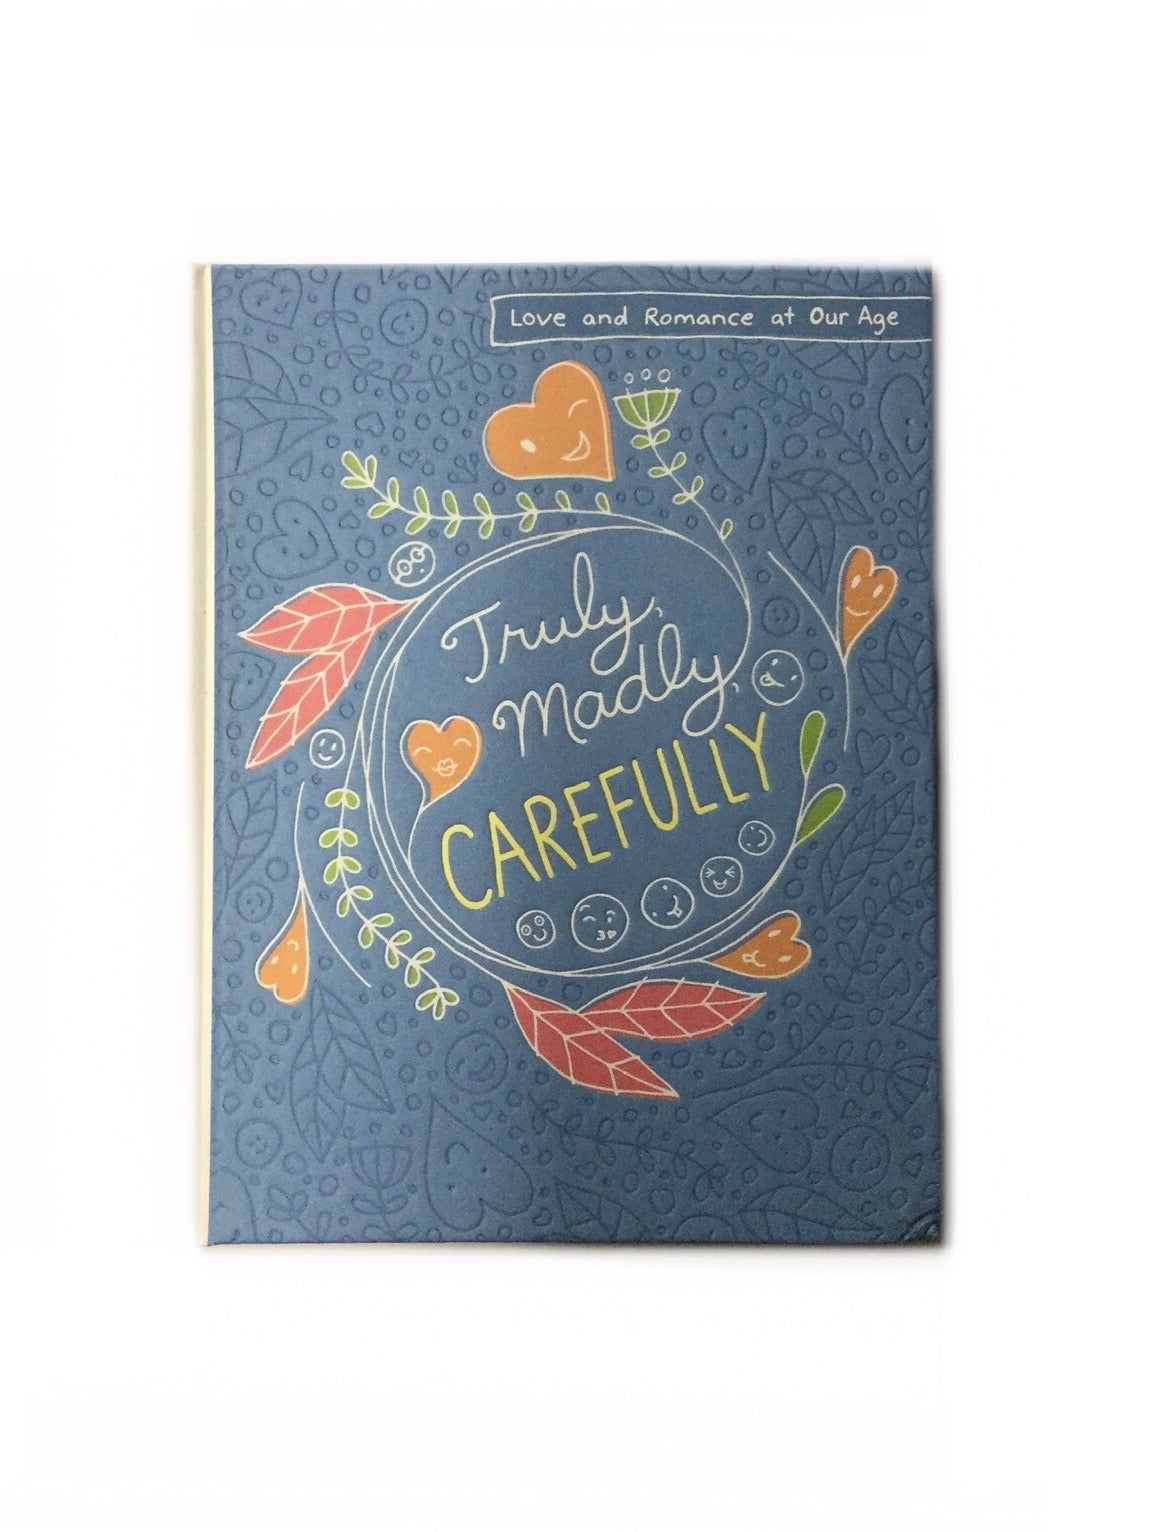 Truly, Madly, Carefully-Red Barn Collections